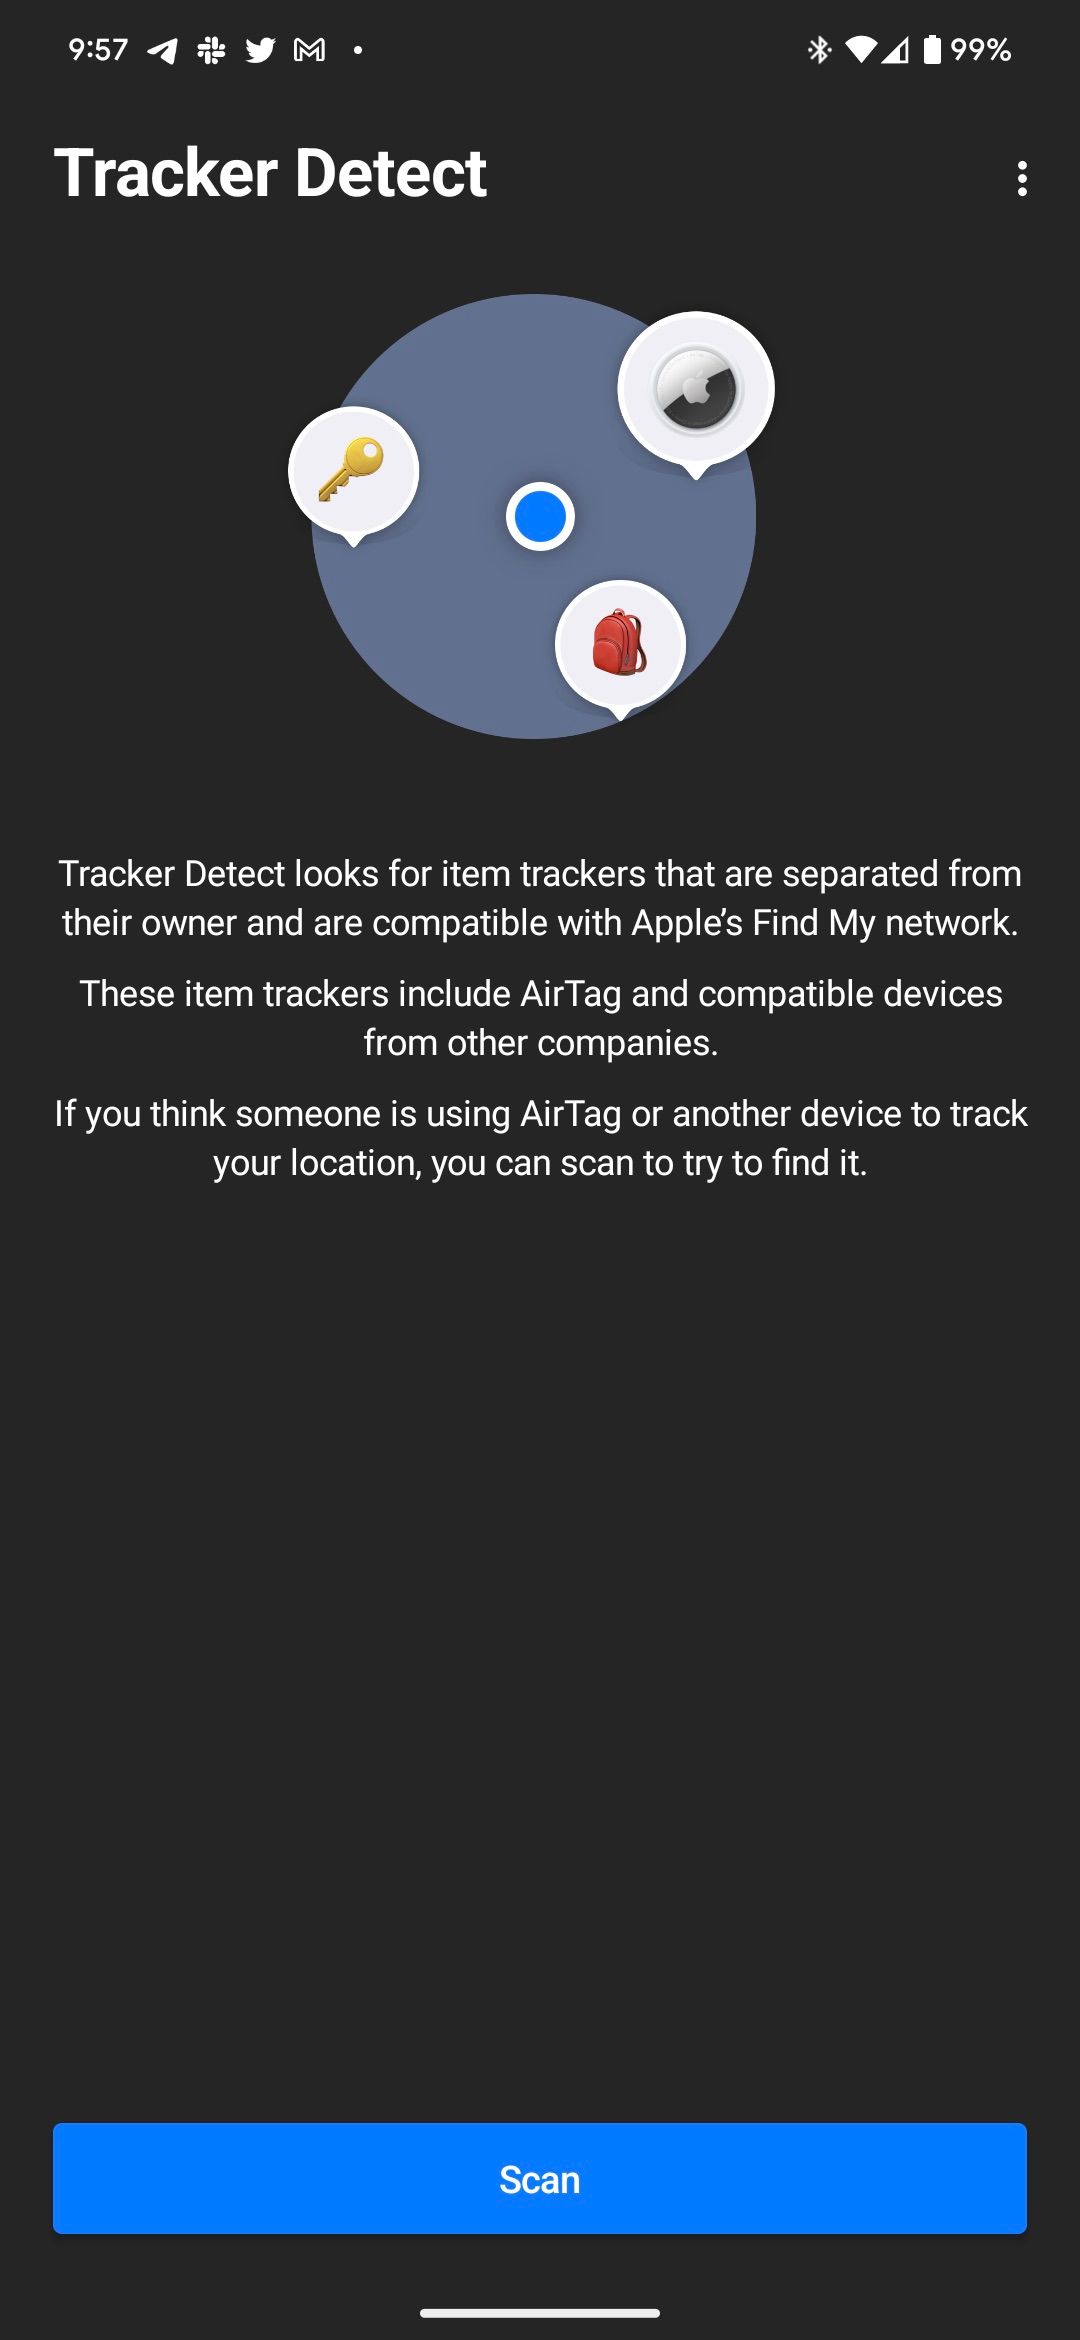 AirTag tracking can now be detected by Android phones